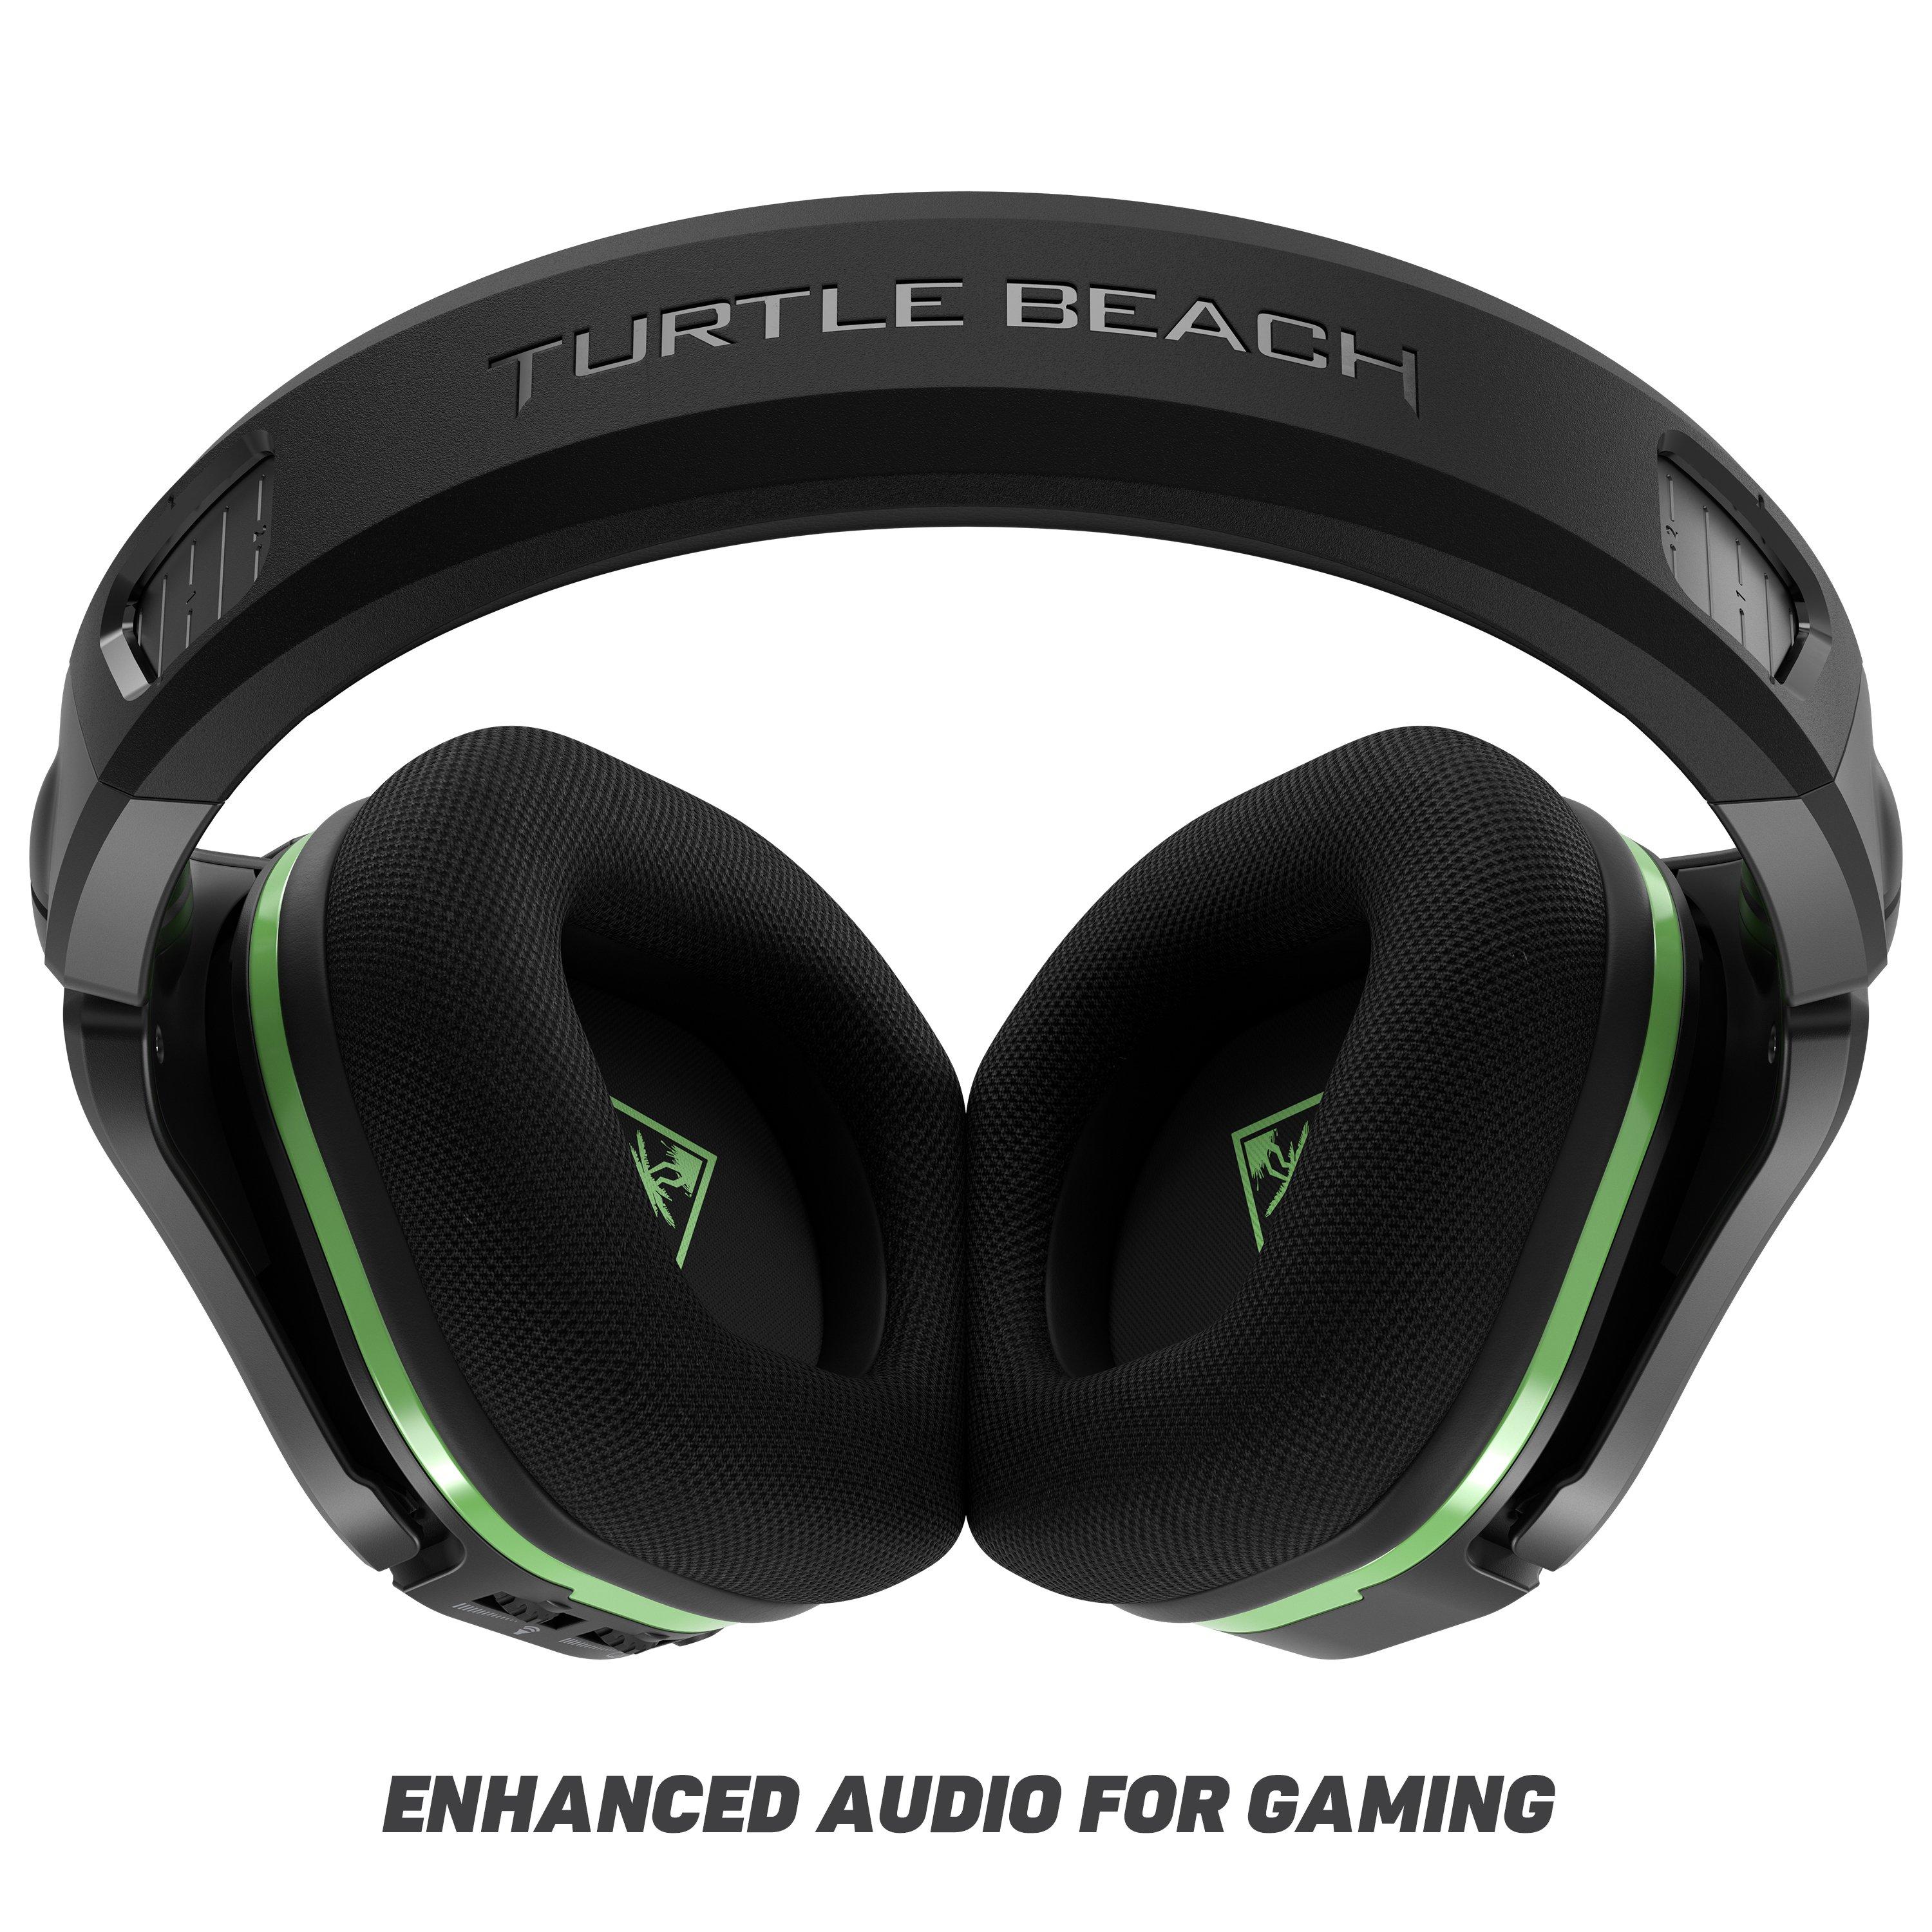 list item 5 of 11 Turtle Beach Stealth 600 Gen 2 Wireless Gaming Headset for Xbox Series X, Xbox Series S, Xbox One and Windows 10 PC